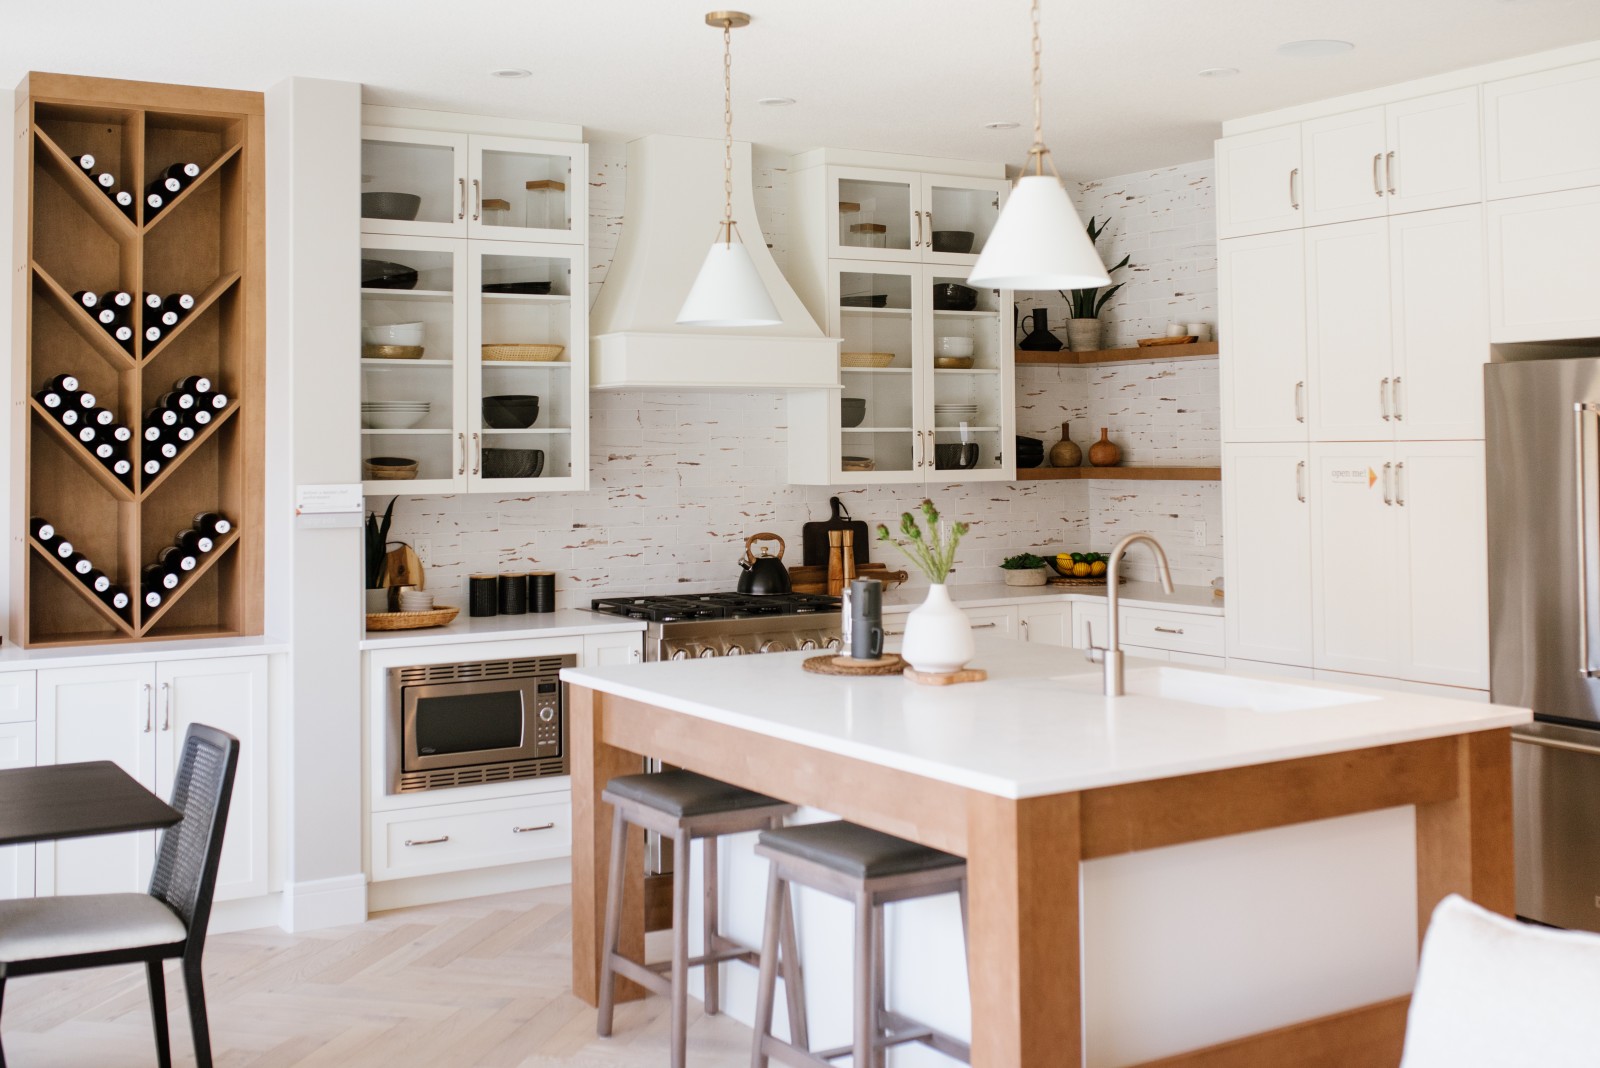 A warm, inviting two-toned white and wood kitchen with custom wood trimmed island with flush eating bar